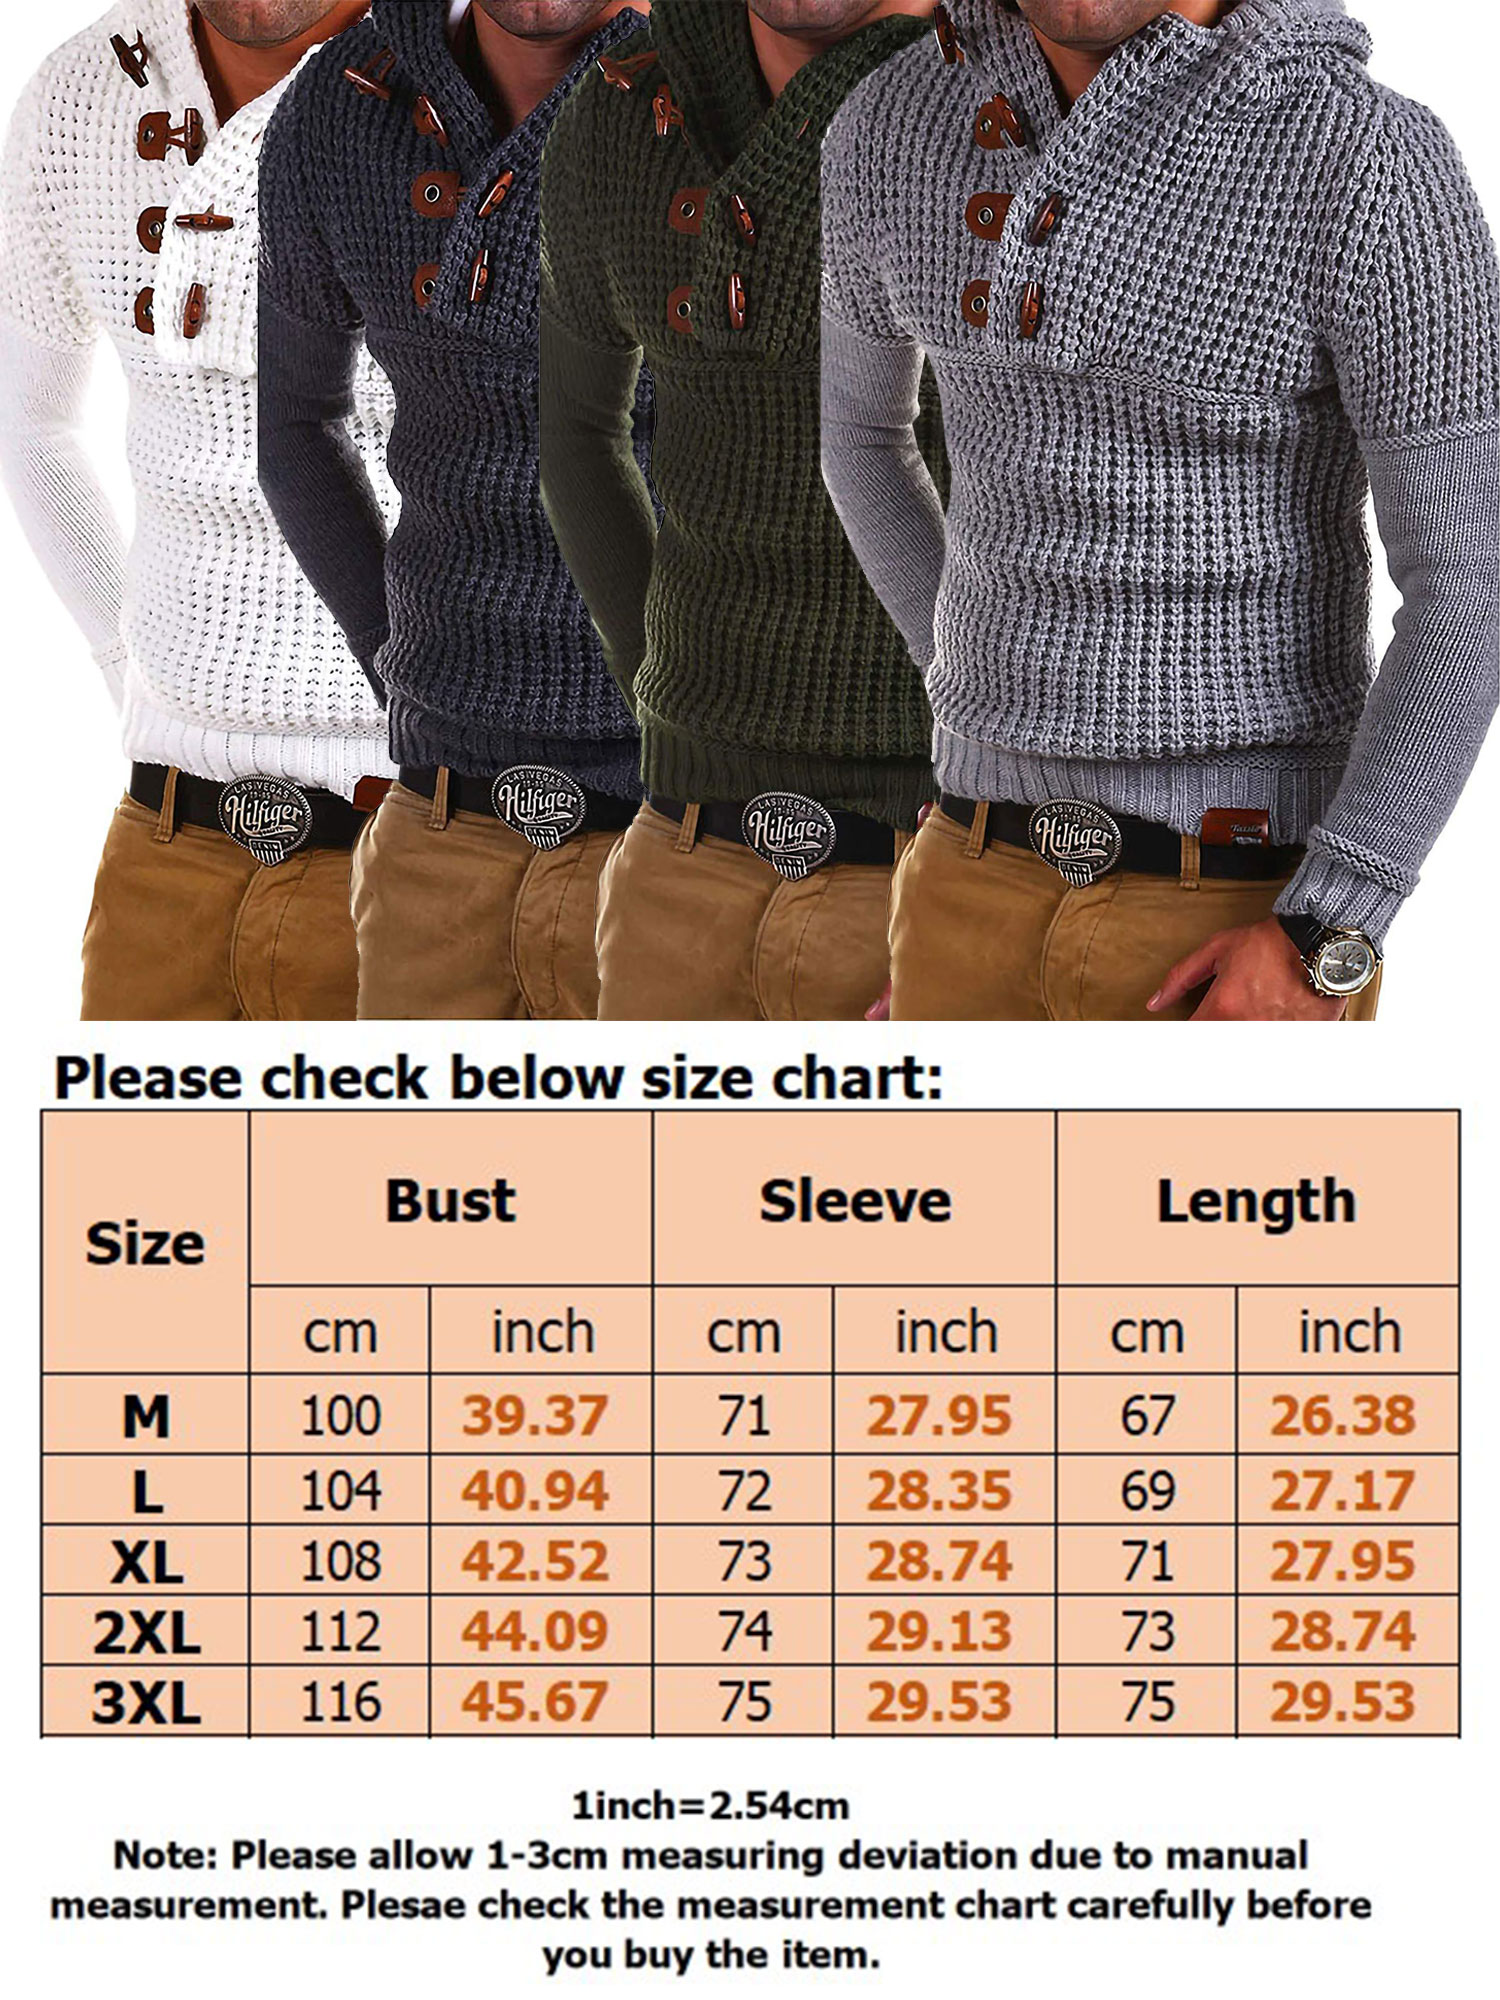 Avamo Mens V Neck Knitted Workout Pullover Sweater Cable Knit Jumper Adults Stylish Knitwear Horn Button Sweaters with Hood - image 2 of 2